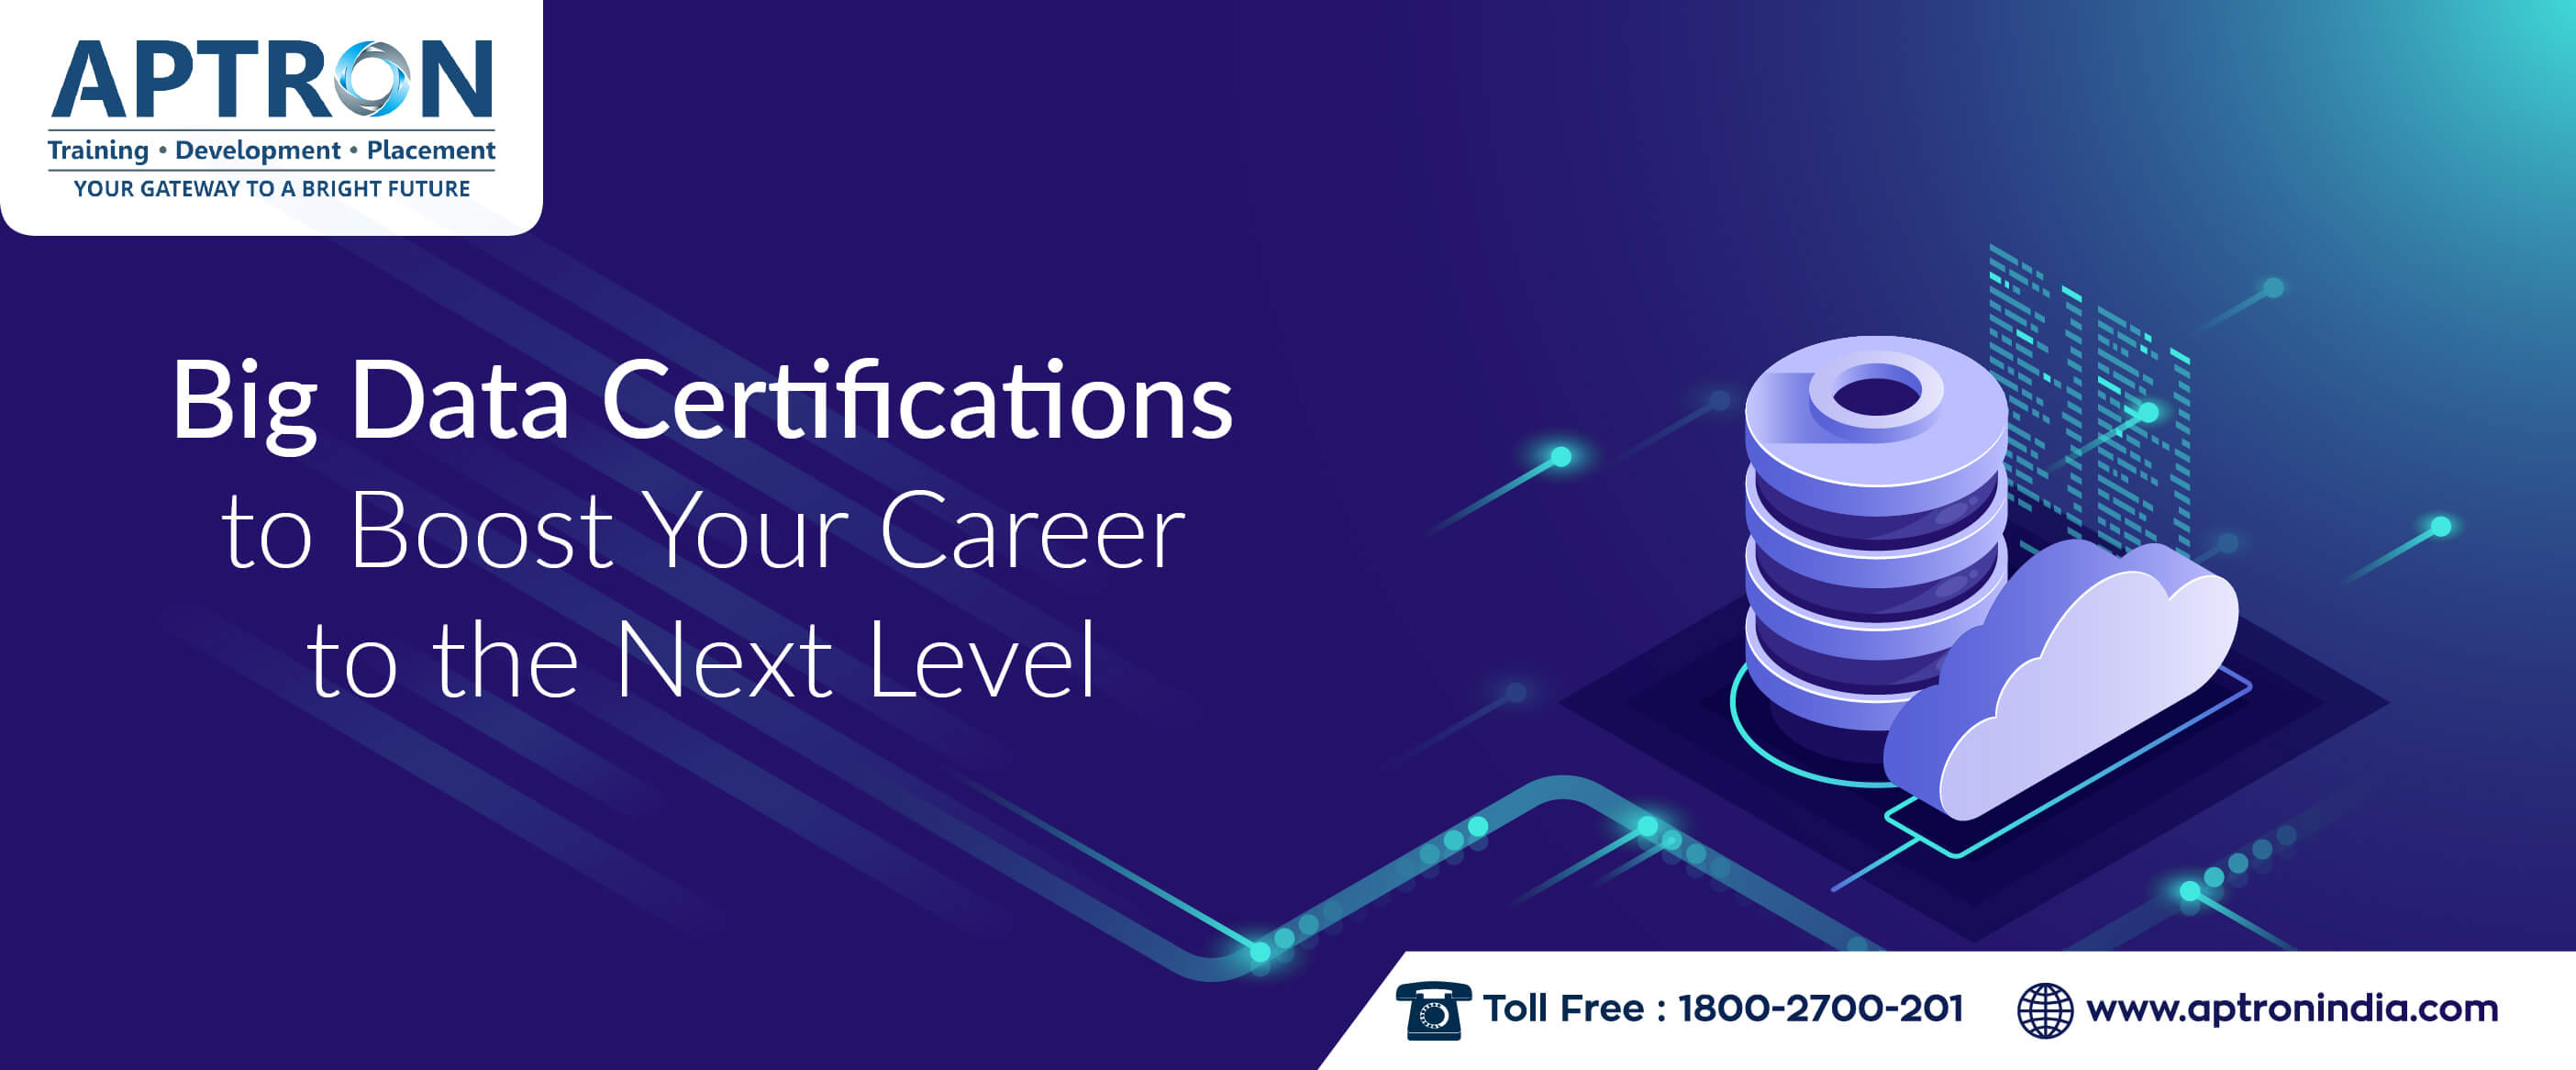 Big Data Certifications to Boost your Career to the Next Level